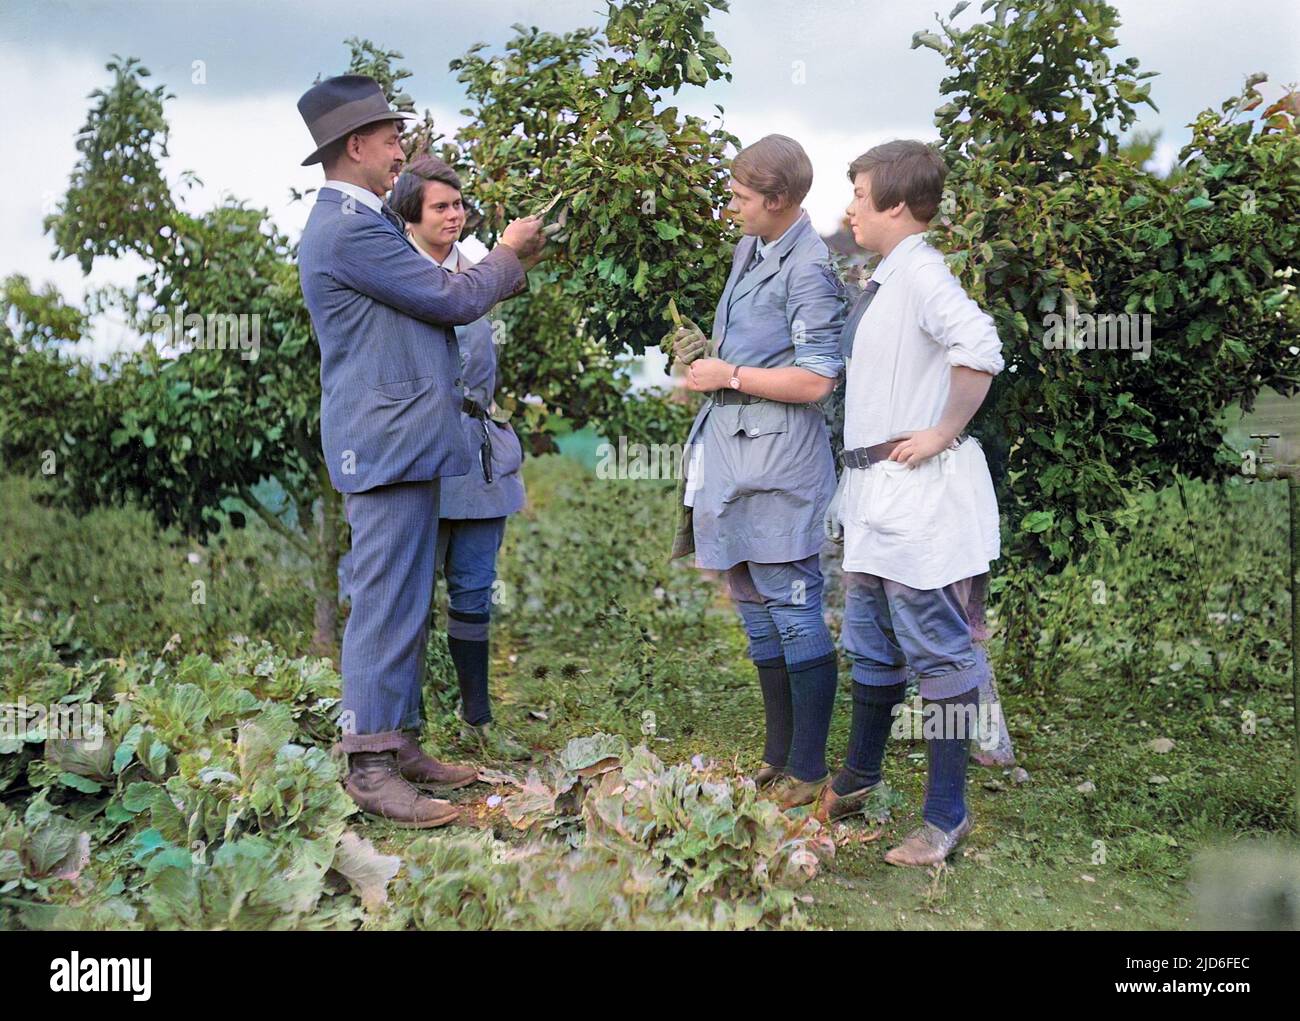 Young women students being taught how to harvest, Swanley Agricultural College, Kent, Engalnd. Colourised version of : 10164557       Date: early 1930s Stock Photo